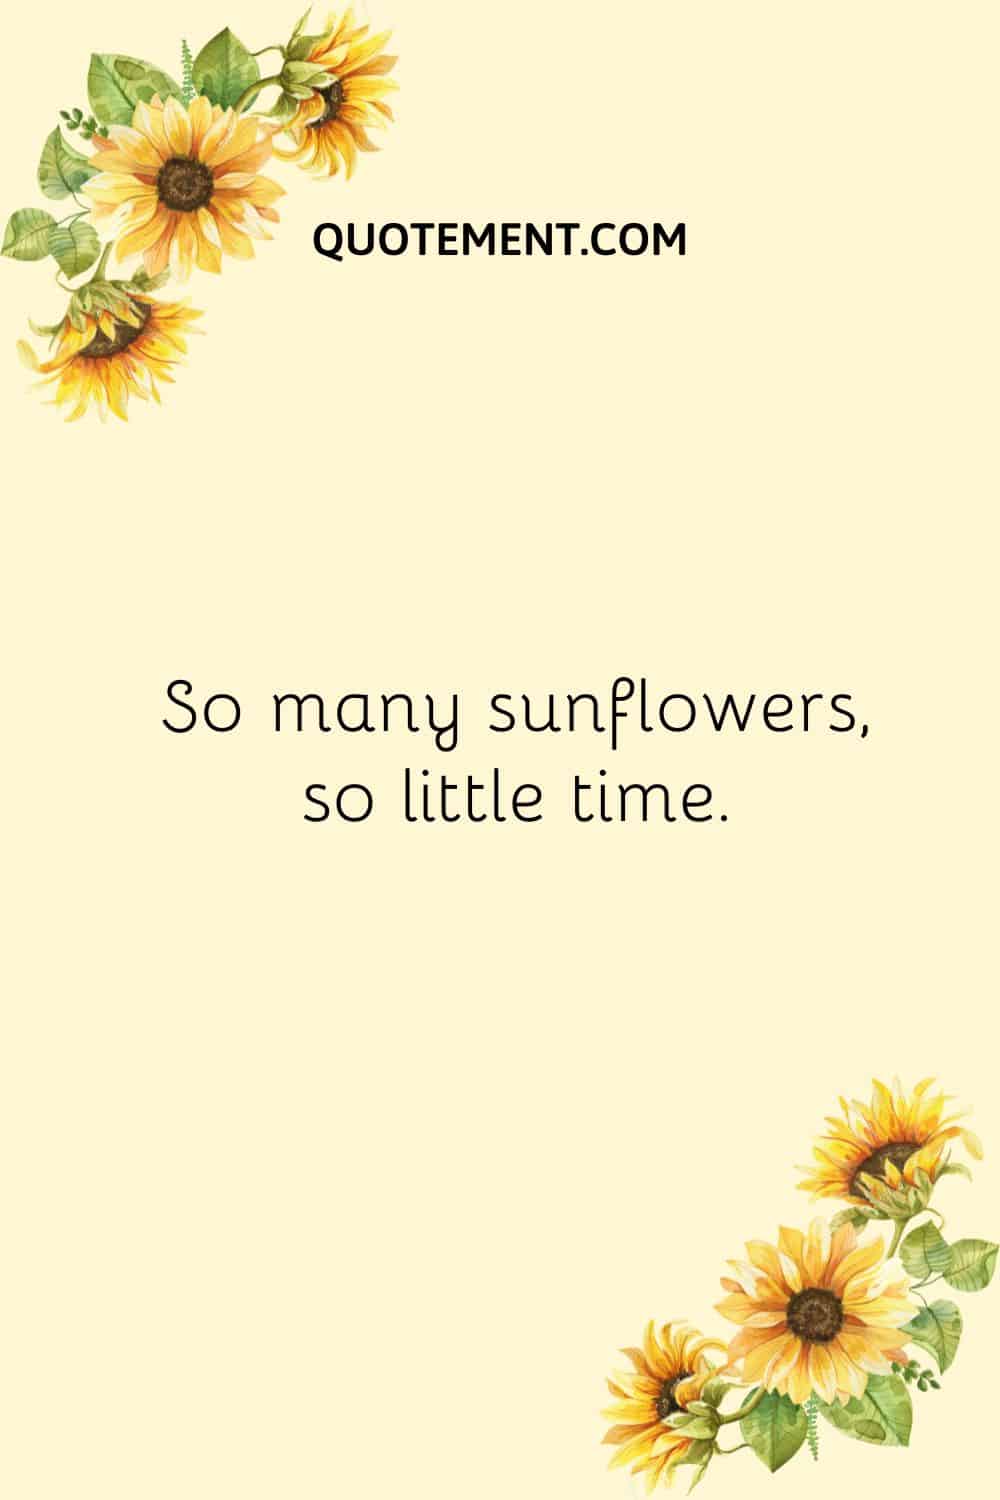 So many sunflowers, so little time.